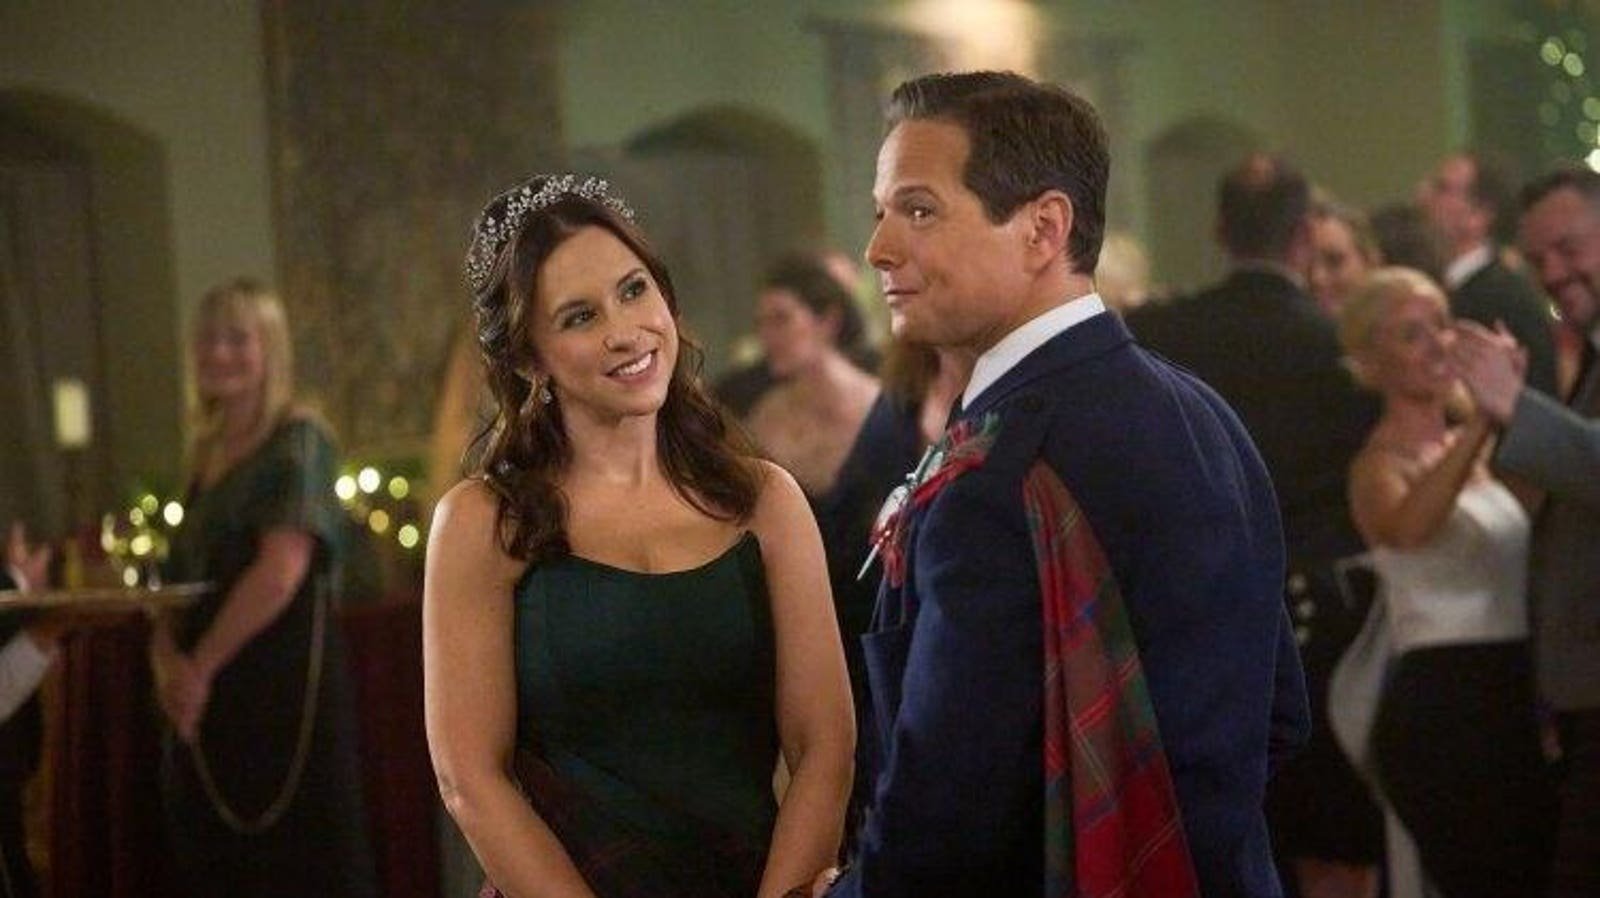 Tis The Season: A Hallmark Christmas Movie Outrated Everything On Cable News Last Week